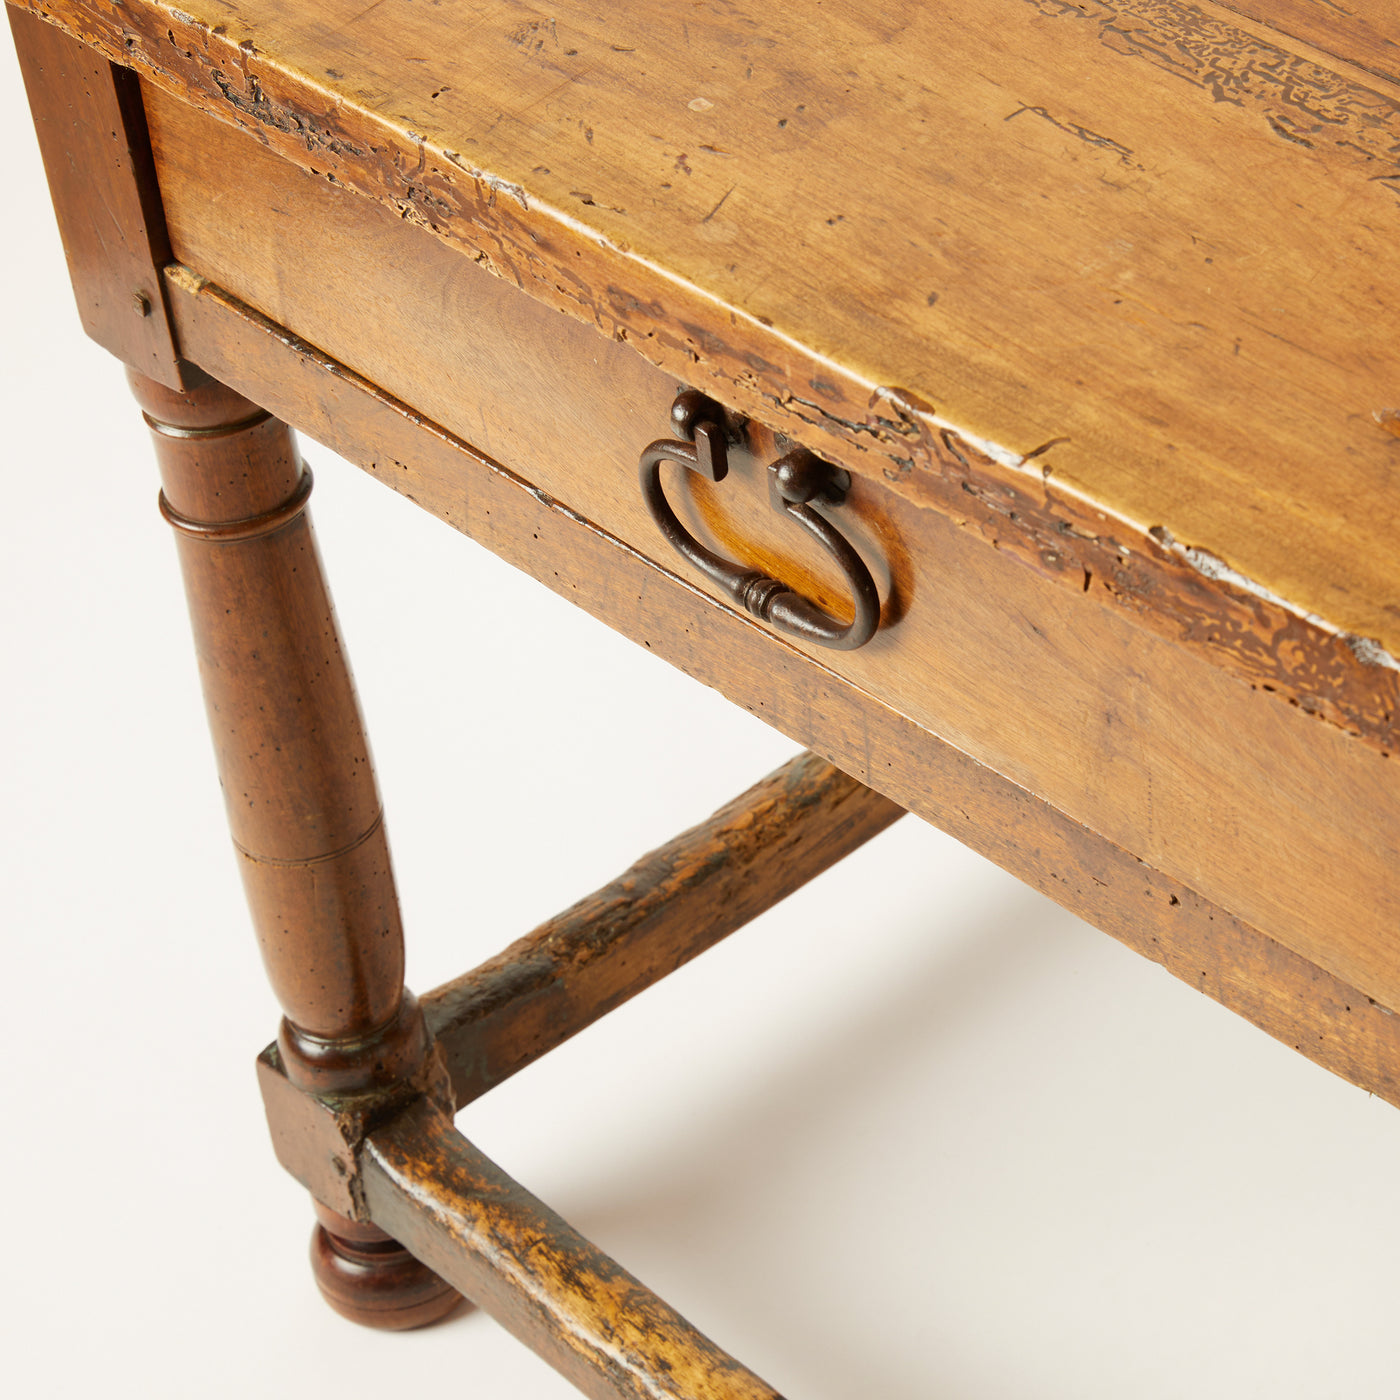 Rustic Oak Table, 18Th C. French